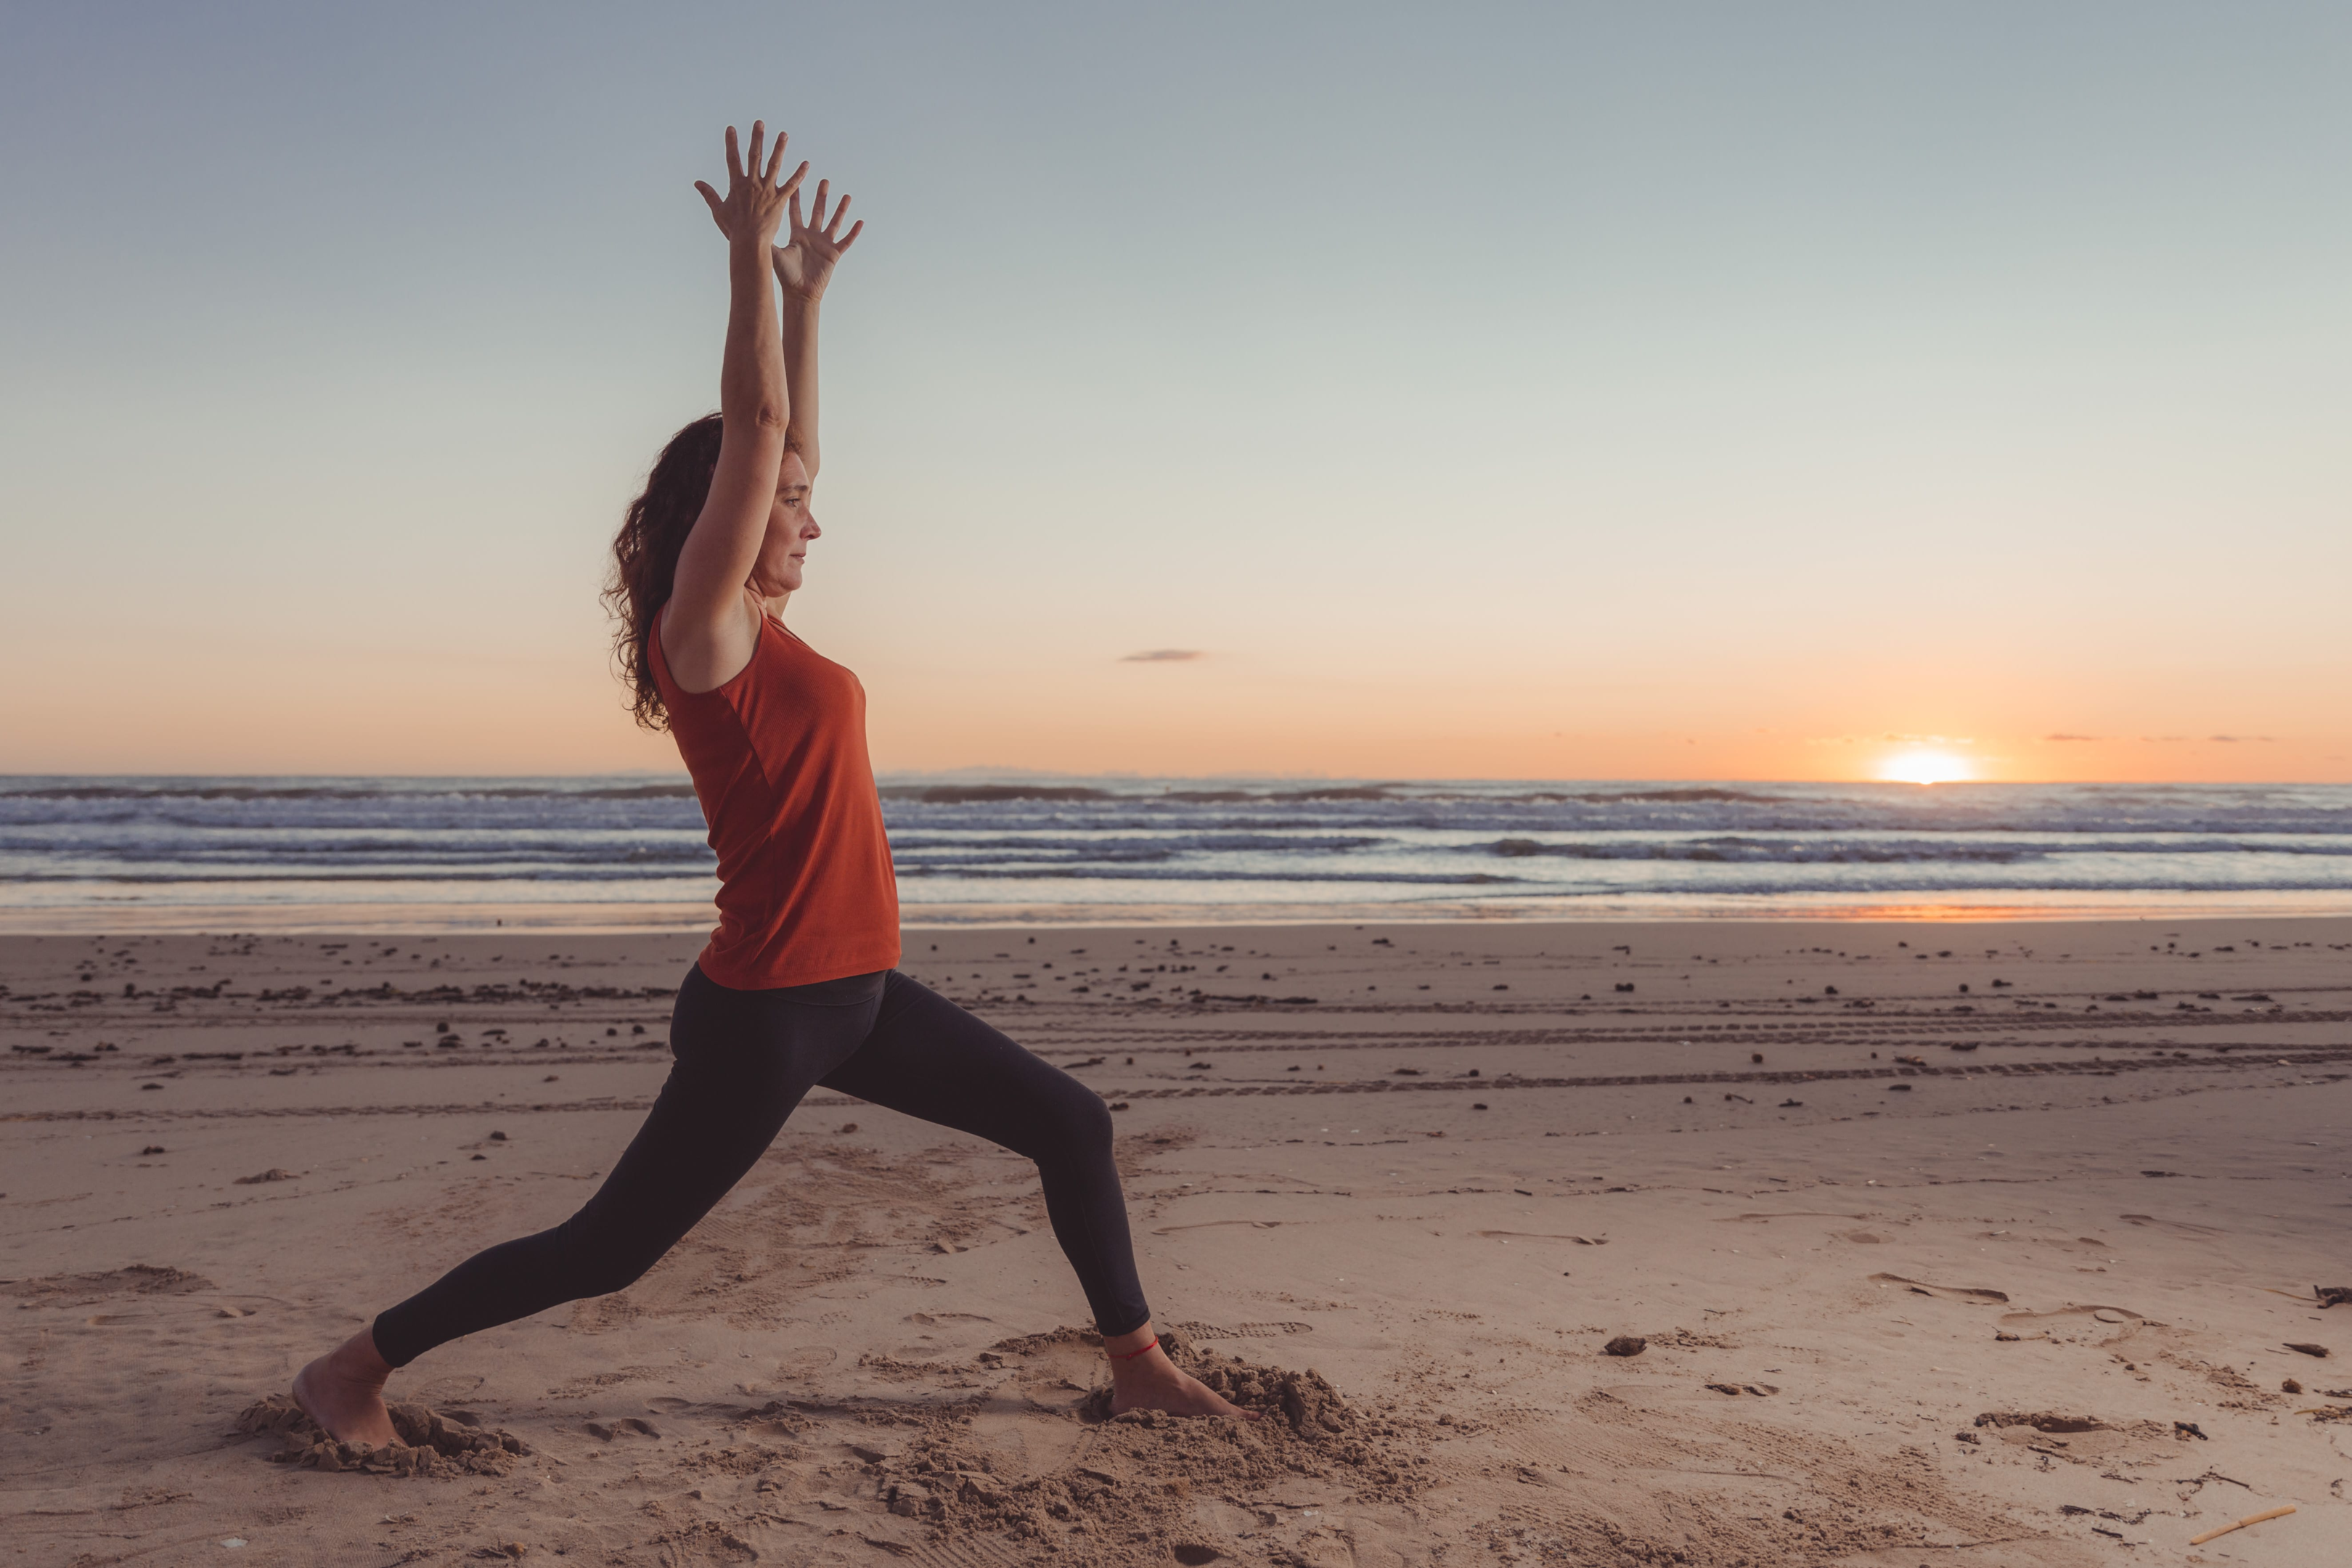 woman doing yoga with good posture.  She is standing on a beach at sunrise wearing black pants and a red top.